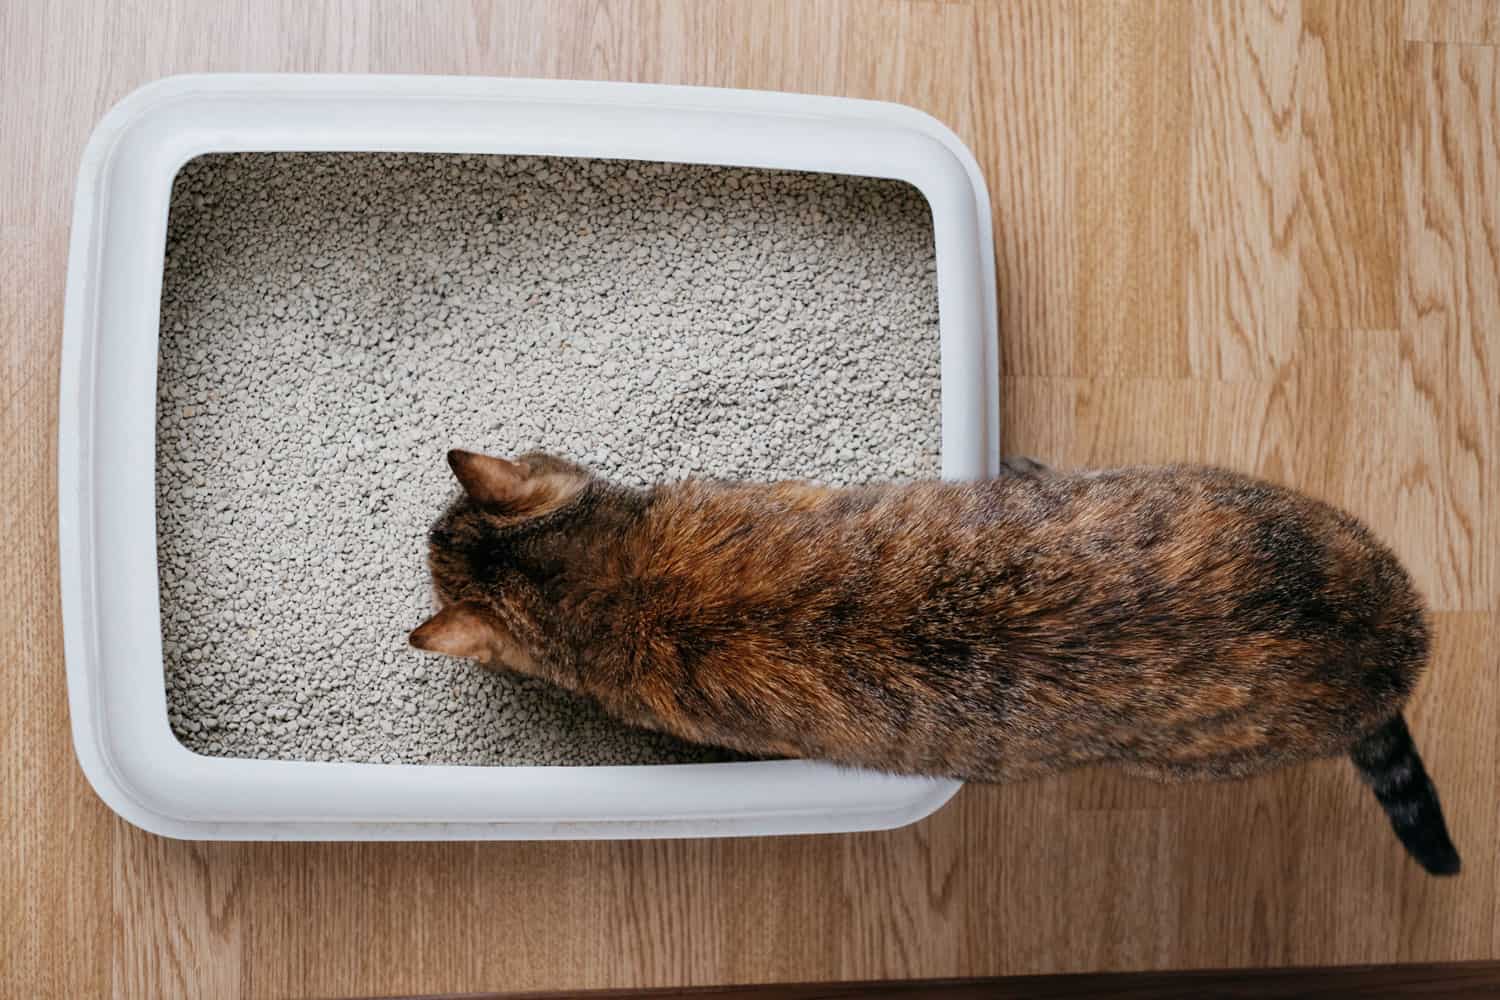 Cat sniffing the litter box